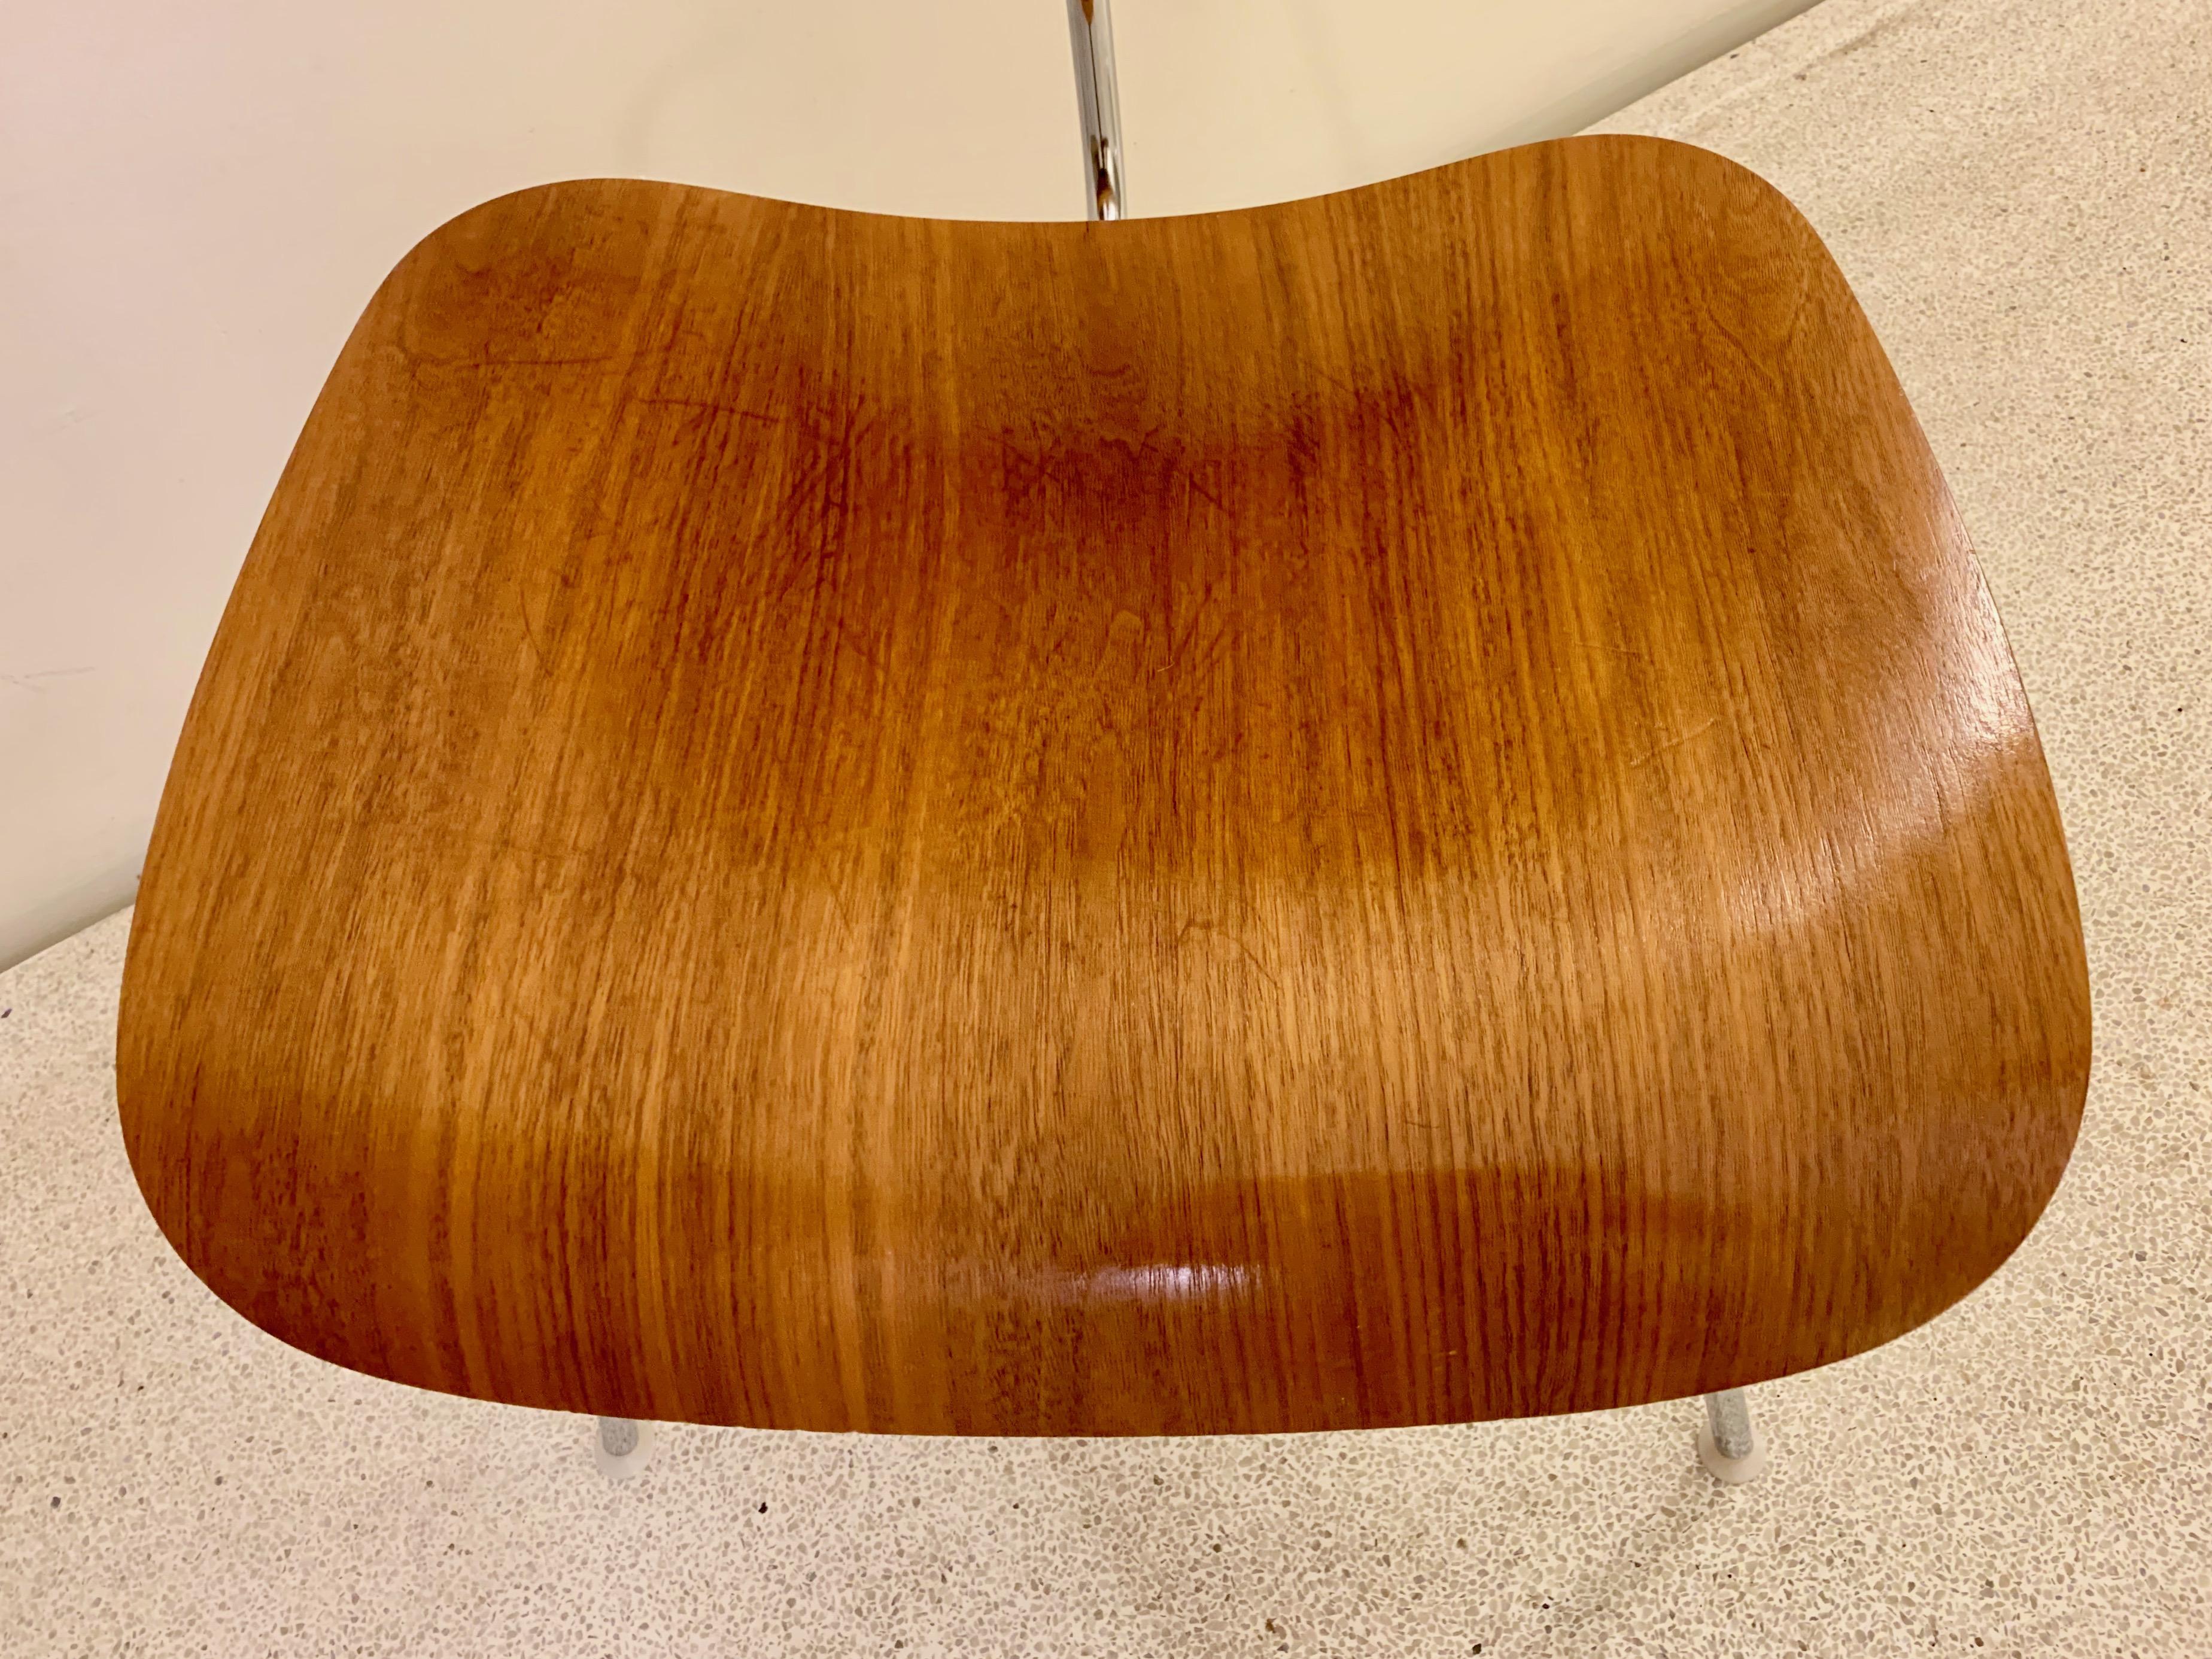 Walnut plywood on chrome frame dining chair metal. Manufactured by Herman Miller. This chair has been part of the VIPP showroom in New York and was later shipped with the VIPP family to their private residence in Dragør Copenhagen. We have four if